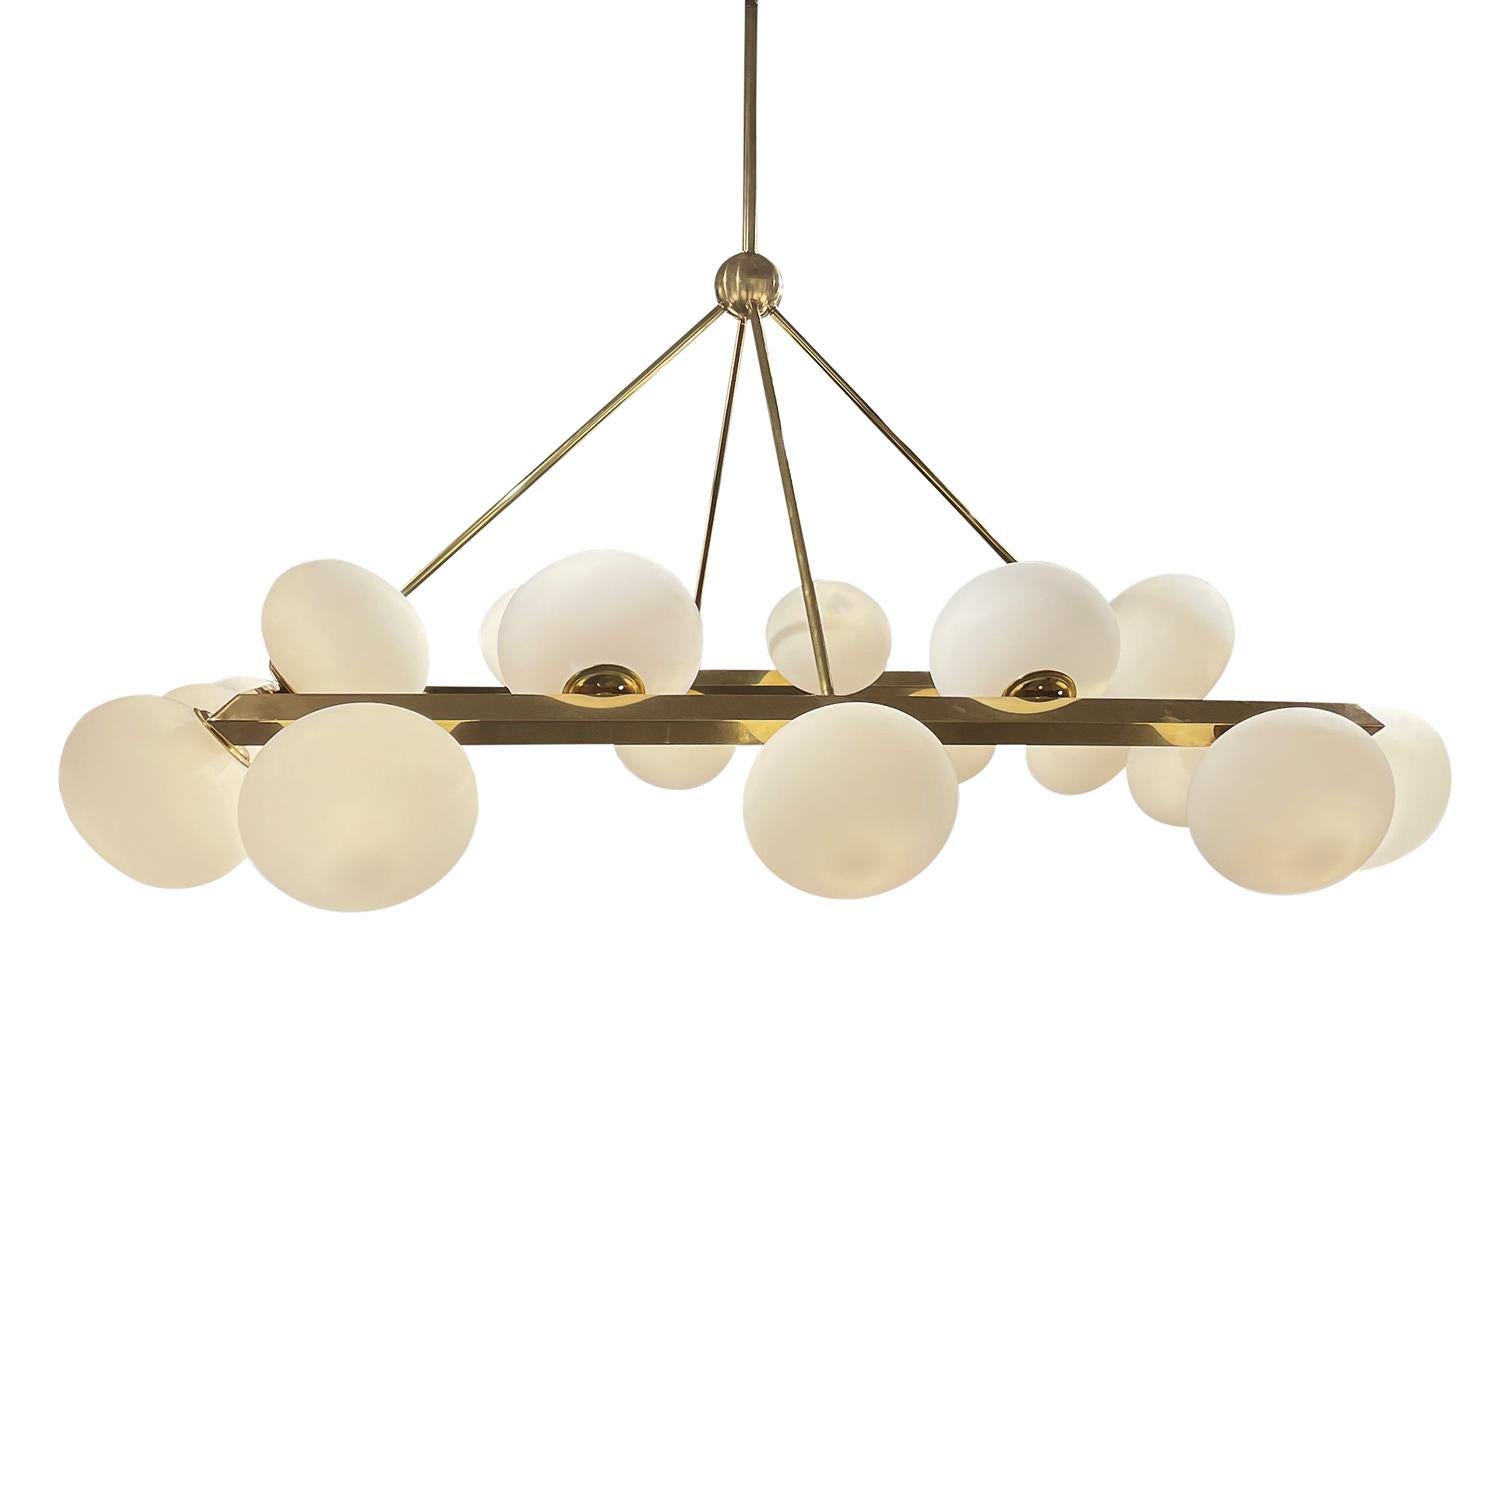 Polished 20th Century Italian Square Opaline Glass Chandelier in the Style of Stilnovo For Sale